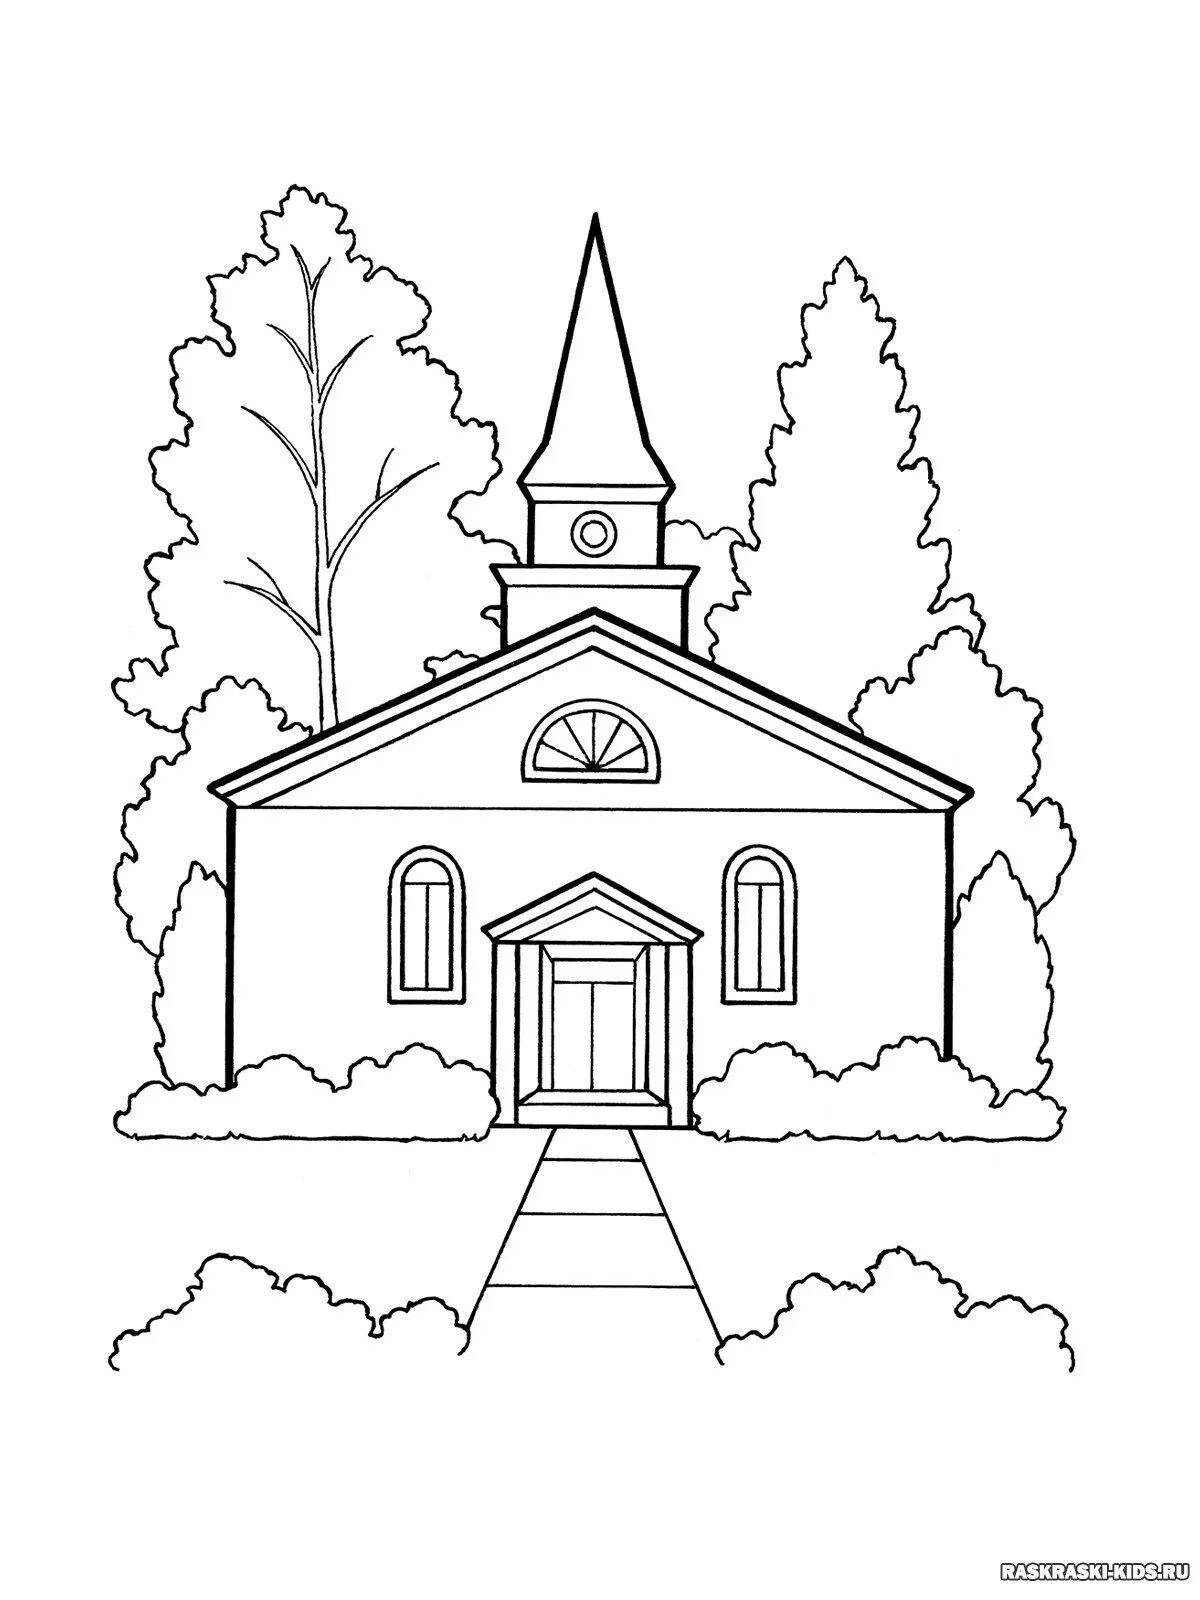 Colorful drawing of the church